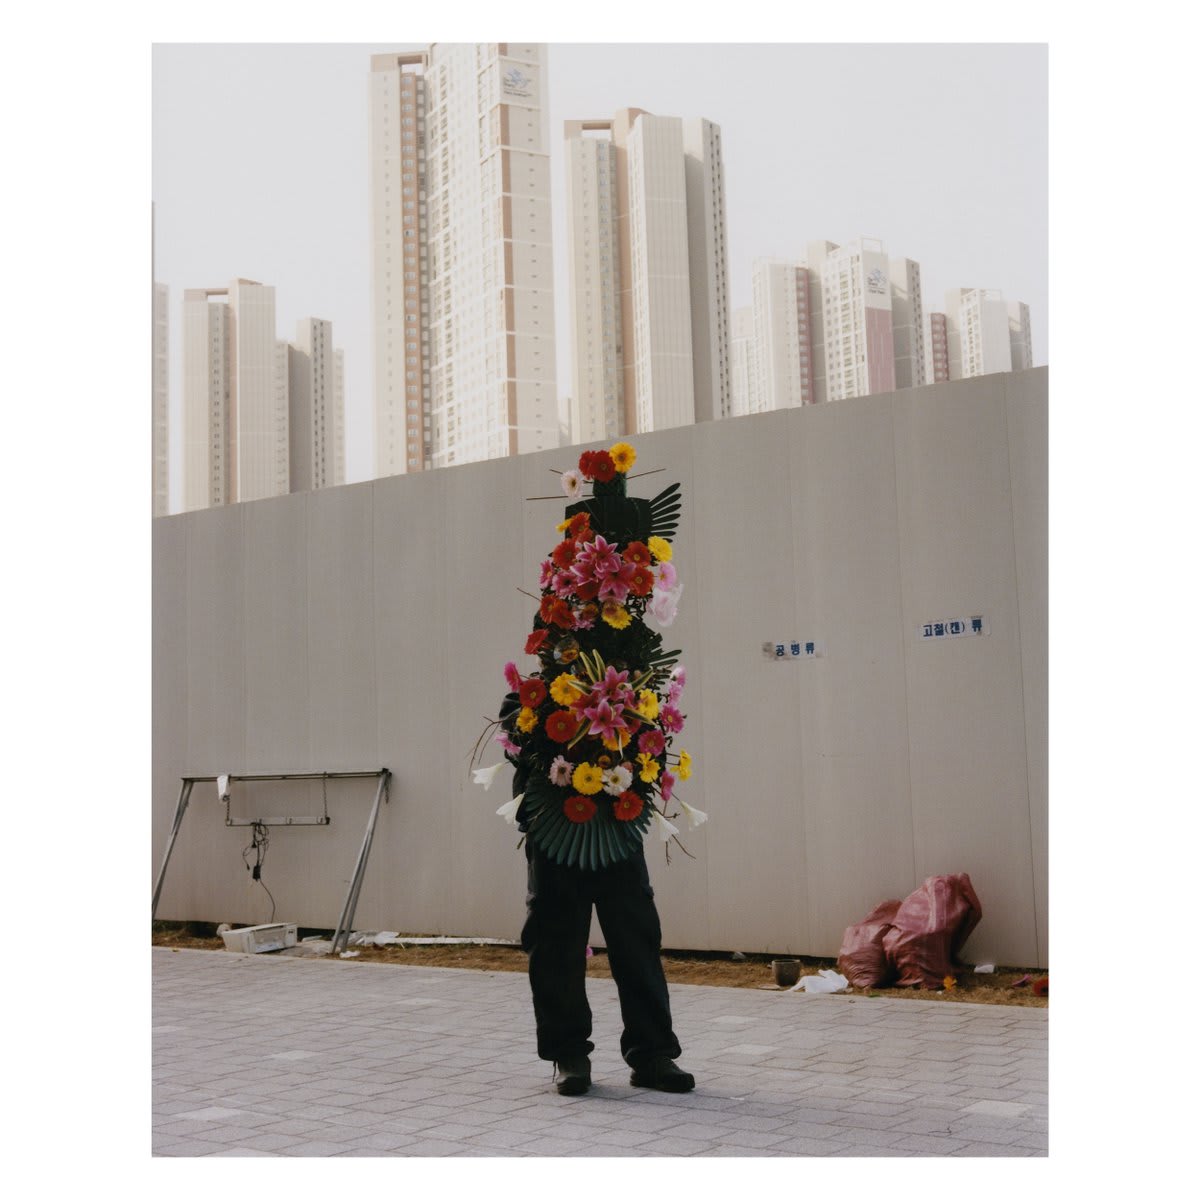 Funeral Flower Man, South Korea. Feb 4, 2020. @aperturefnd's Olgaç Bozalp selects this image for Works of Imagination, the Magnum Square Print Sale in partnership with @aperturefnd. See all images available: https://t.co/T9HpH6dDMz © Olgaç Bozalp courtesy